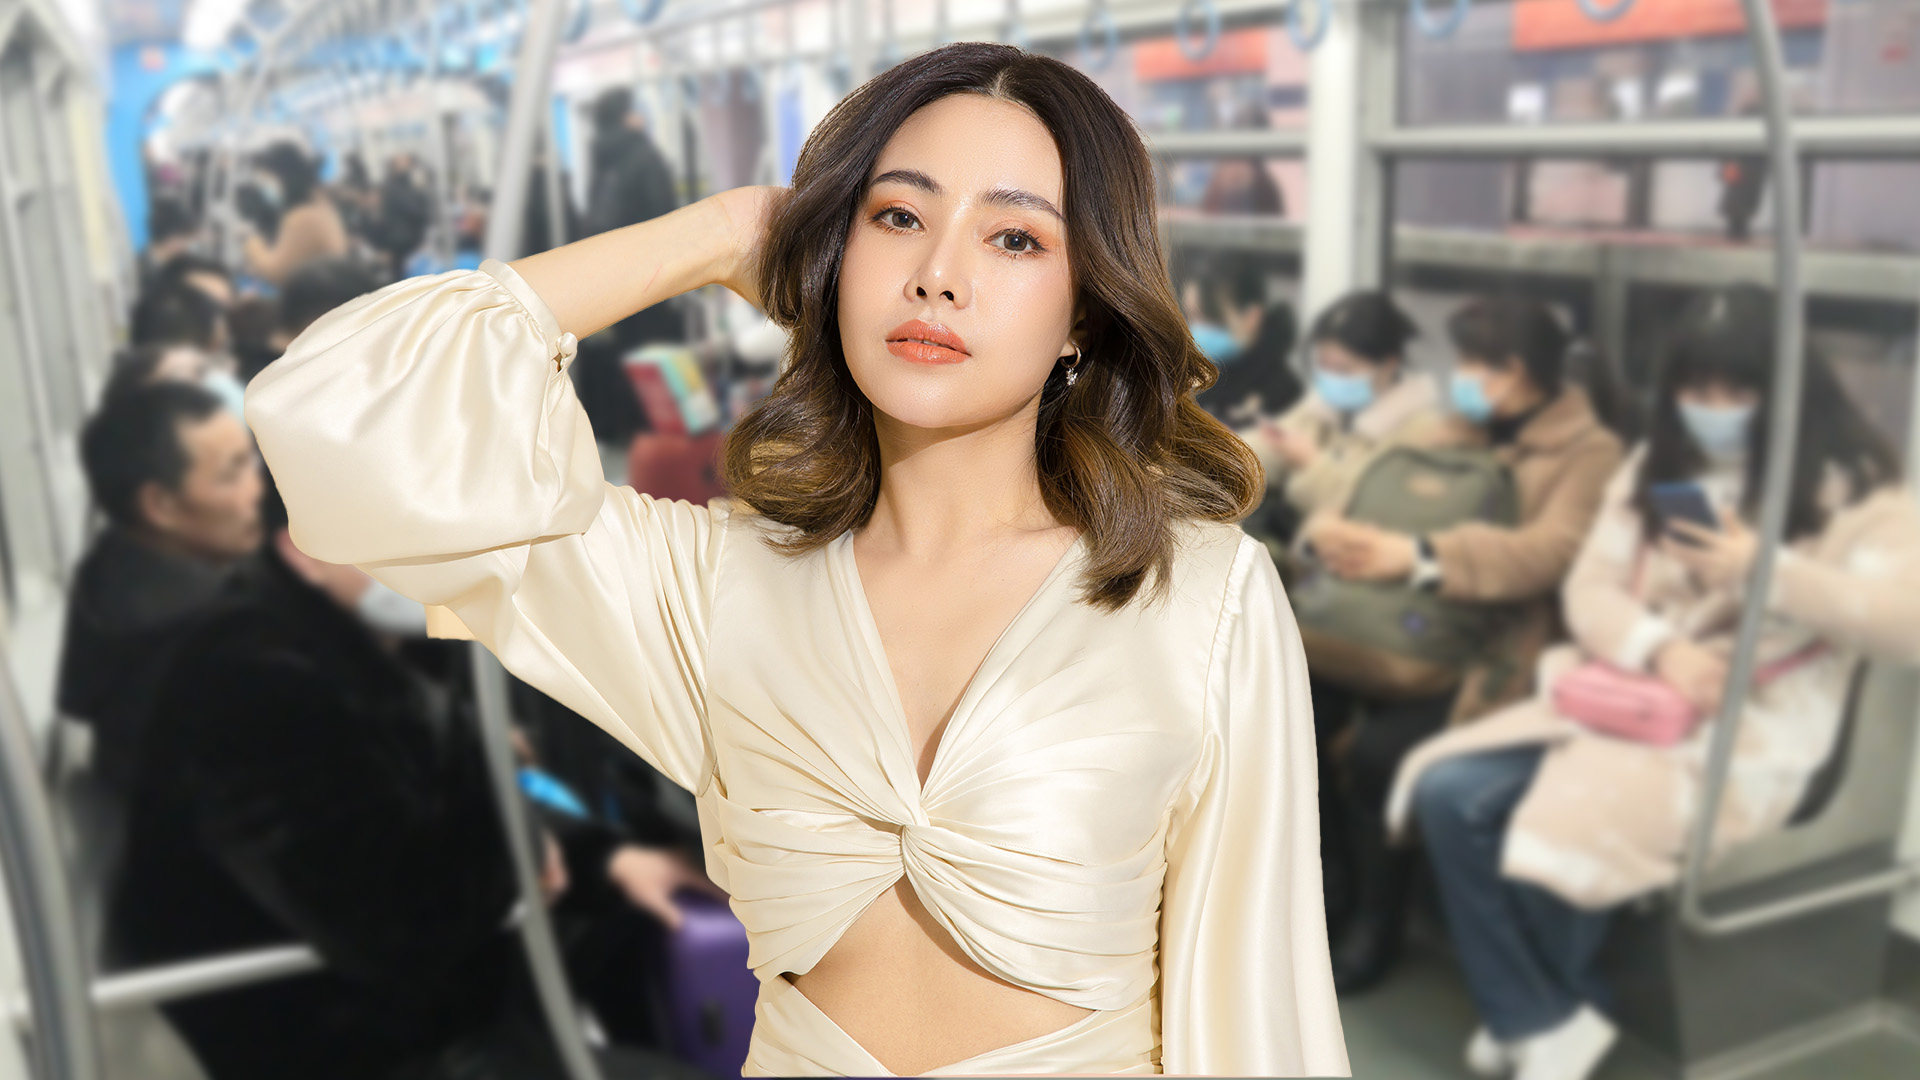 Mainland social media observers have praised an older woman who stood up to a man on a subway train in China when he harassed a younger fellow passenger over the way she was dressed. Photo: SCMP composite